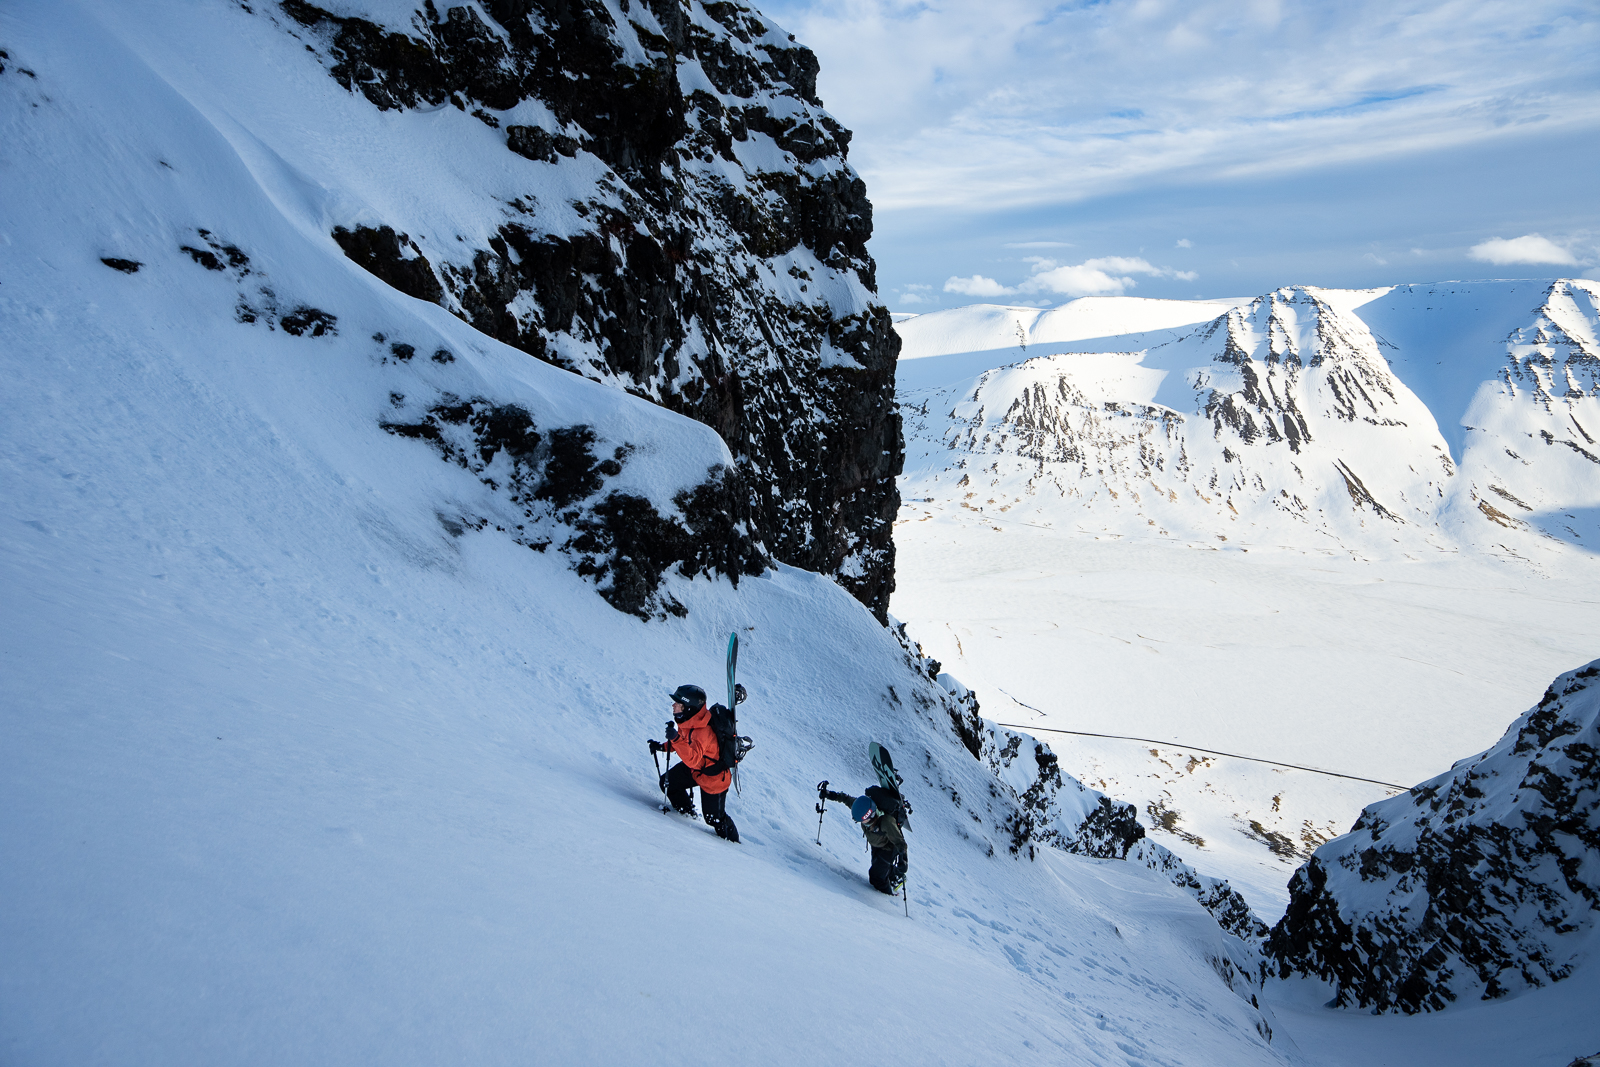 Robin Van Gyn and Elena Hight climb a couloir in Iceland's Westfjords with snowboards on their backs. 